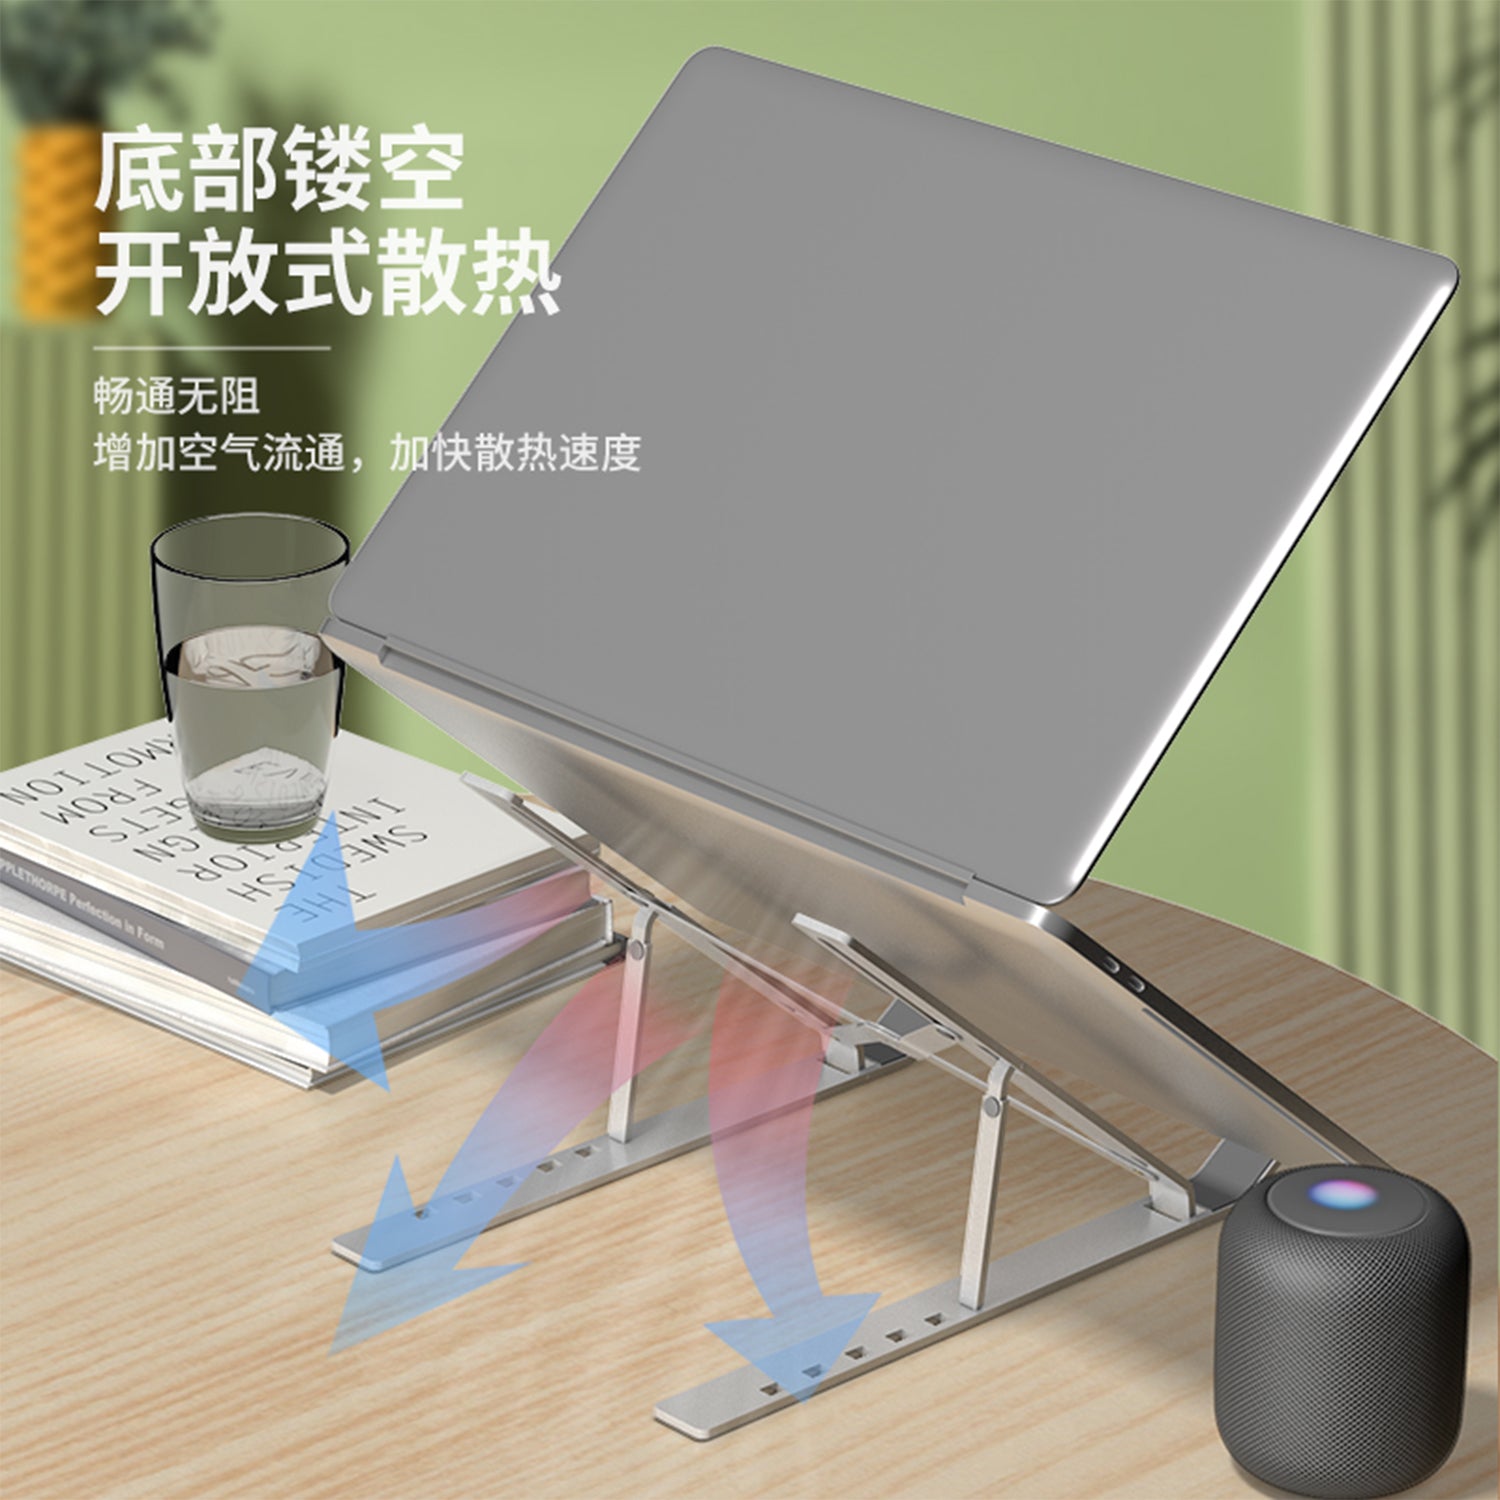 Aluminum Alloy Laptop Stand With Adjustable Height, Rotatable And Foldable Notebook Holder With Heat Dissipation, Silver